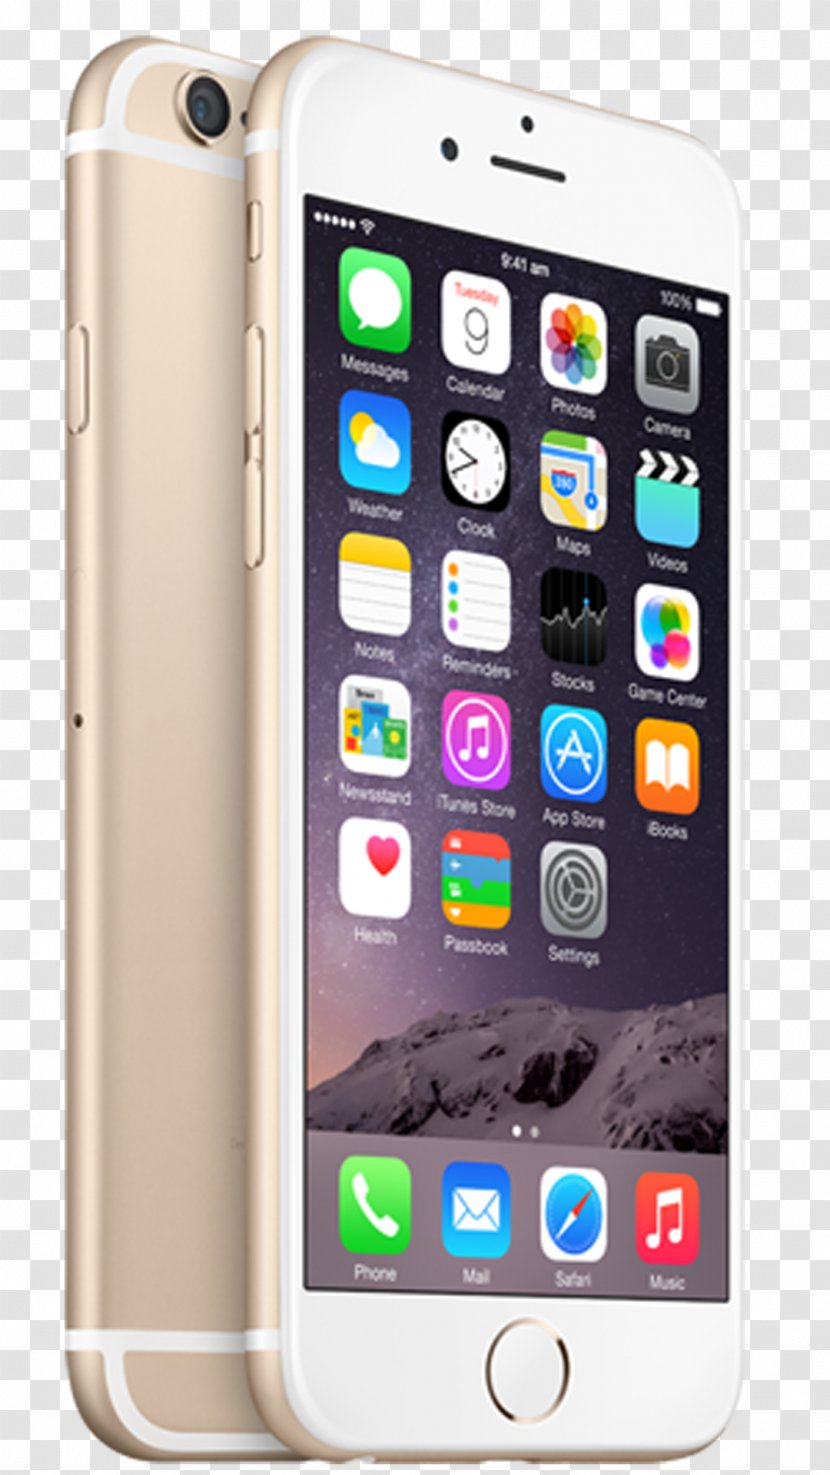 IPhone 6 Plus Apple Telephone Gold - Telephony - Iphone Transparent PNG